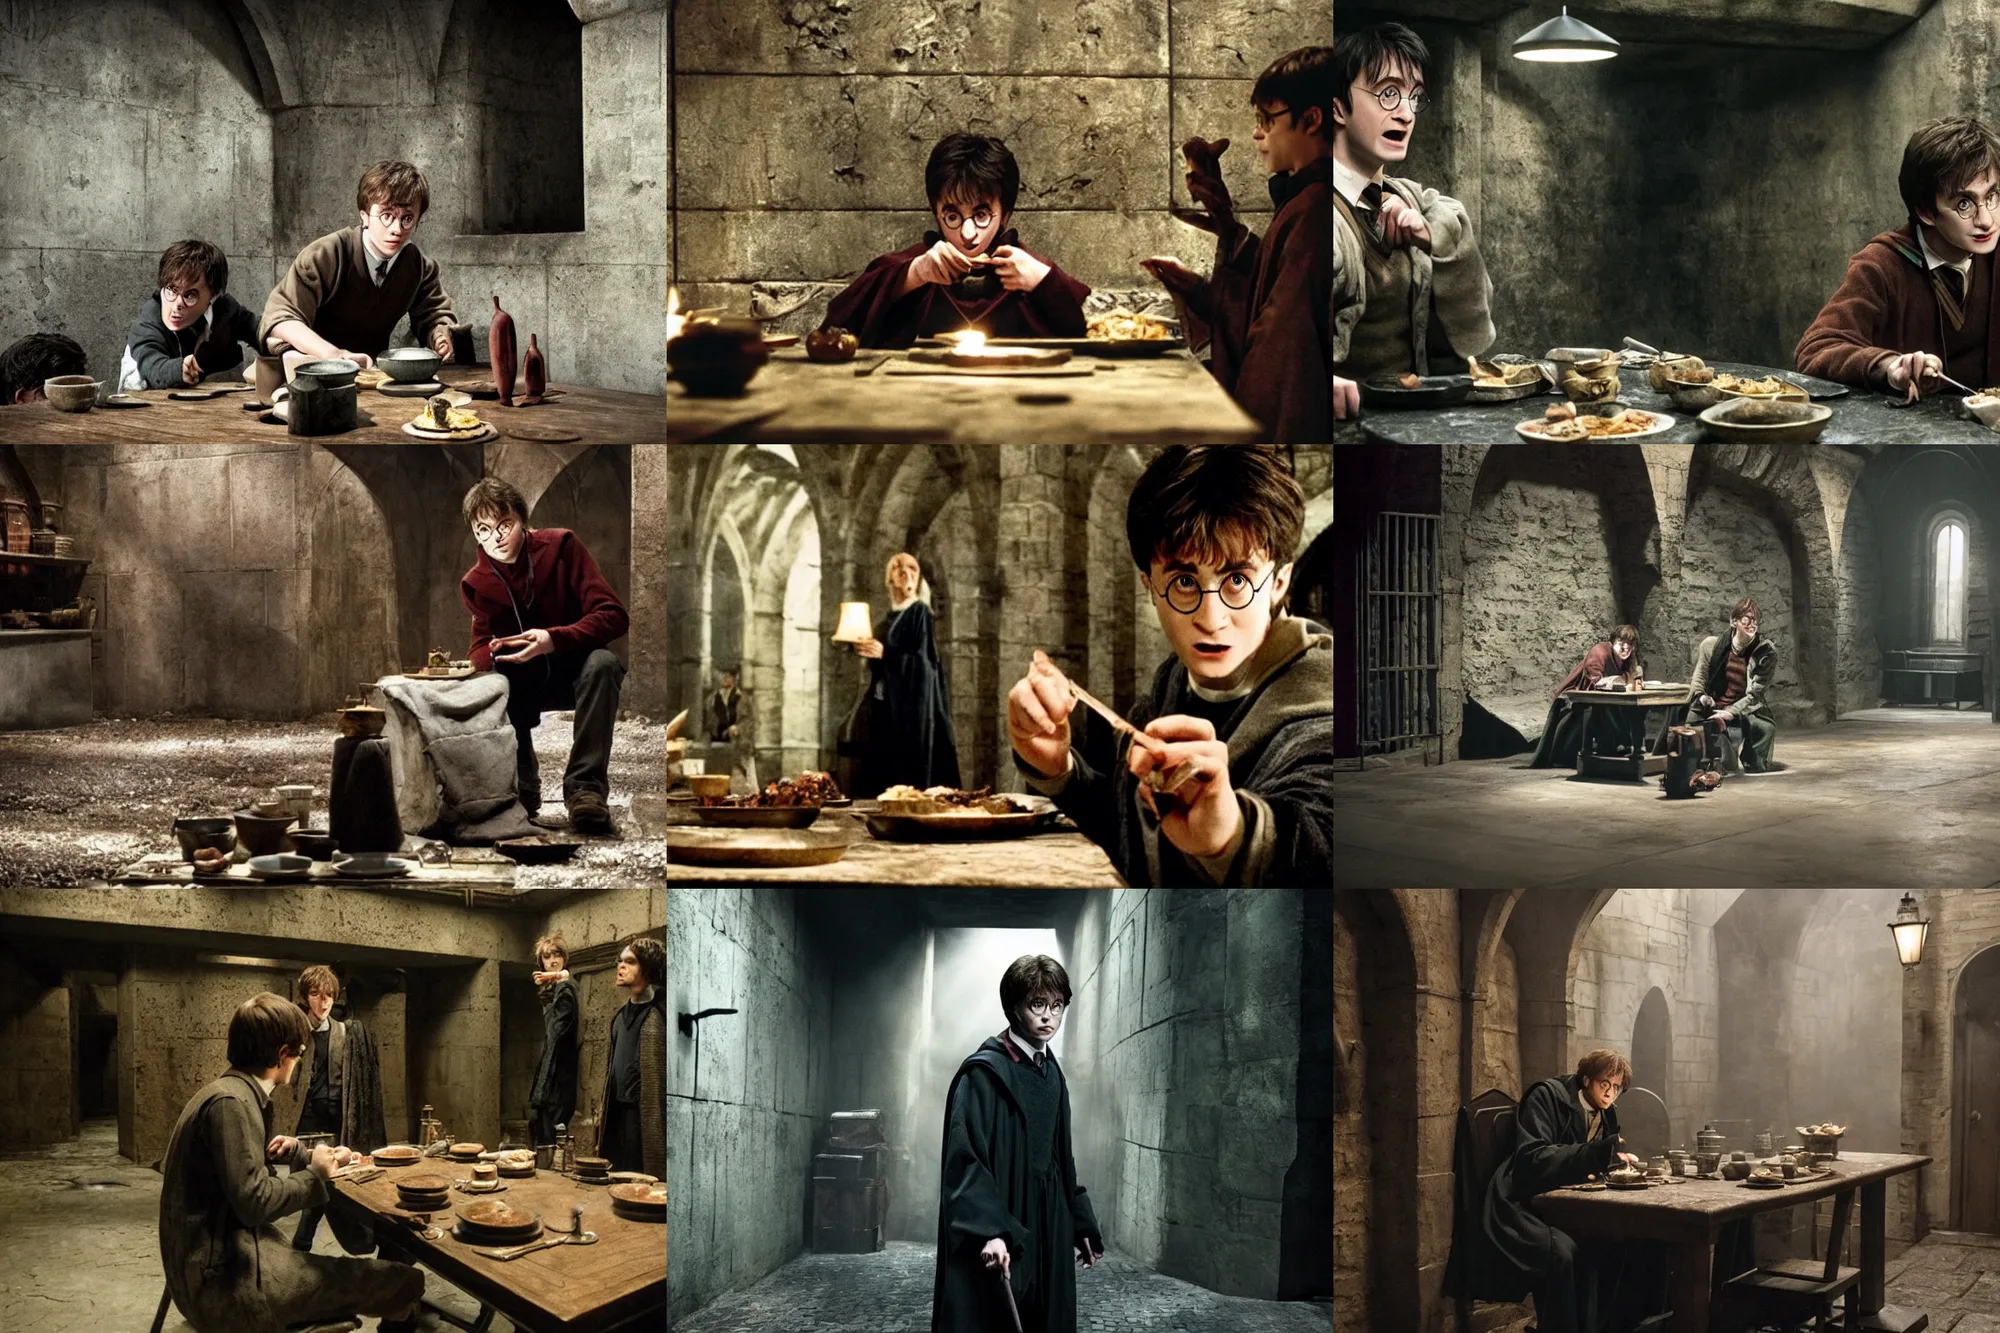 Prompt: Harry potter film, a scene where Harry is eating in a Concrete wall basement, Dark cinematic color tones.